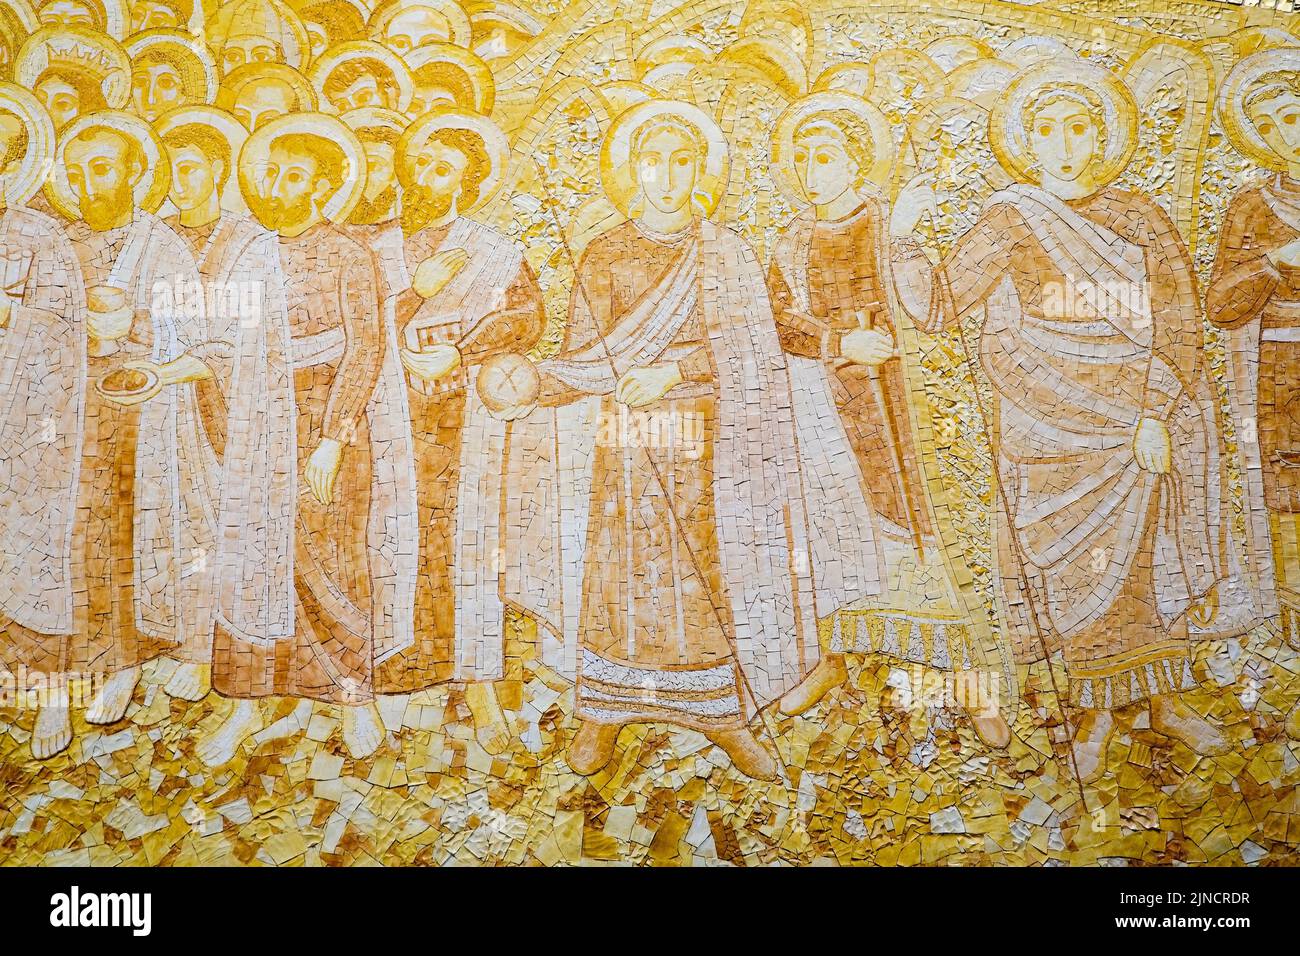 Gold and white colored religious mosaic on wall inside the basilica at Fatima, Portugal Stock Photo